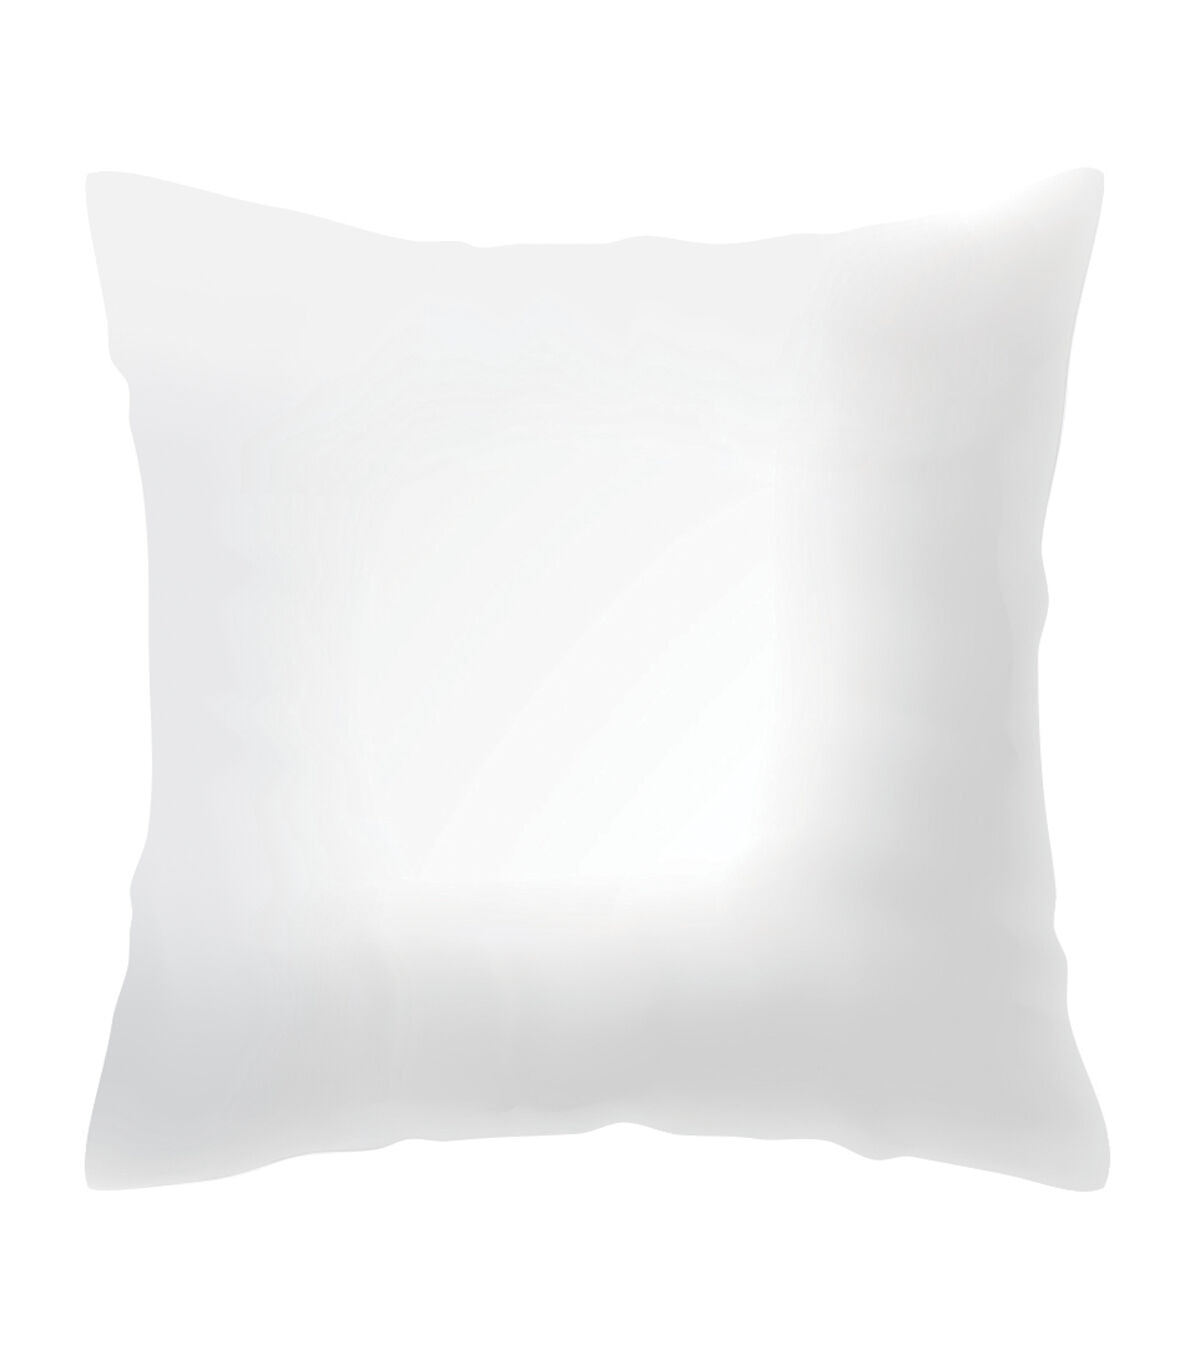 small pillow forms